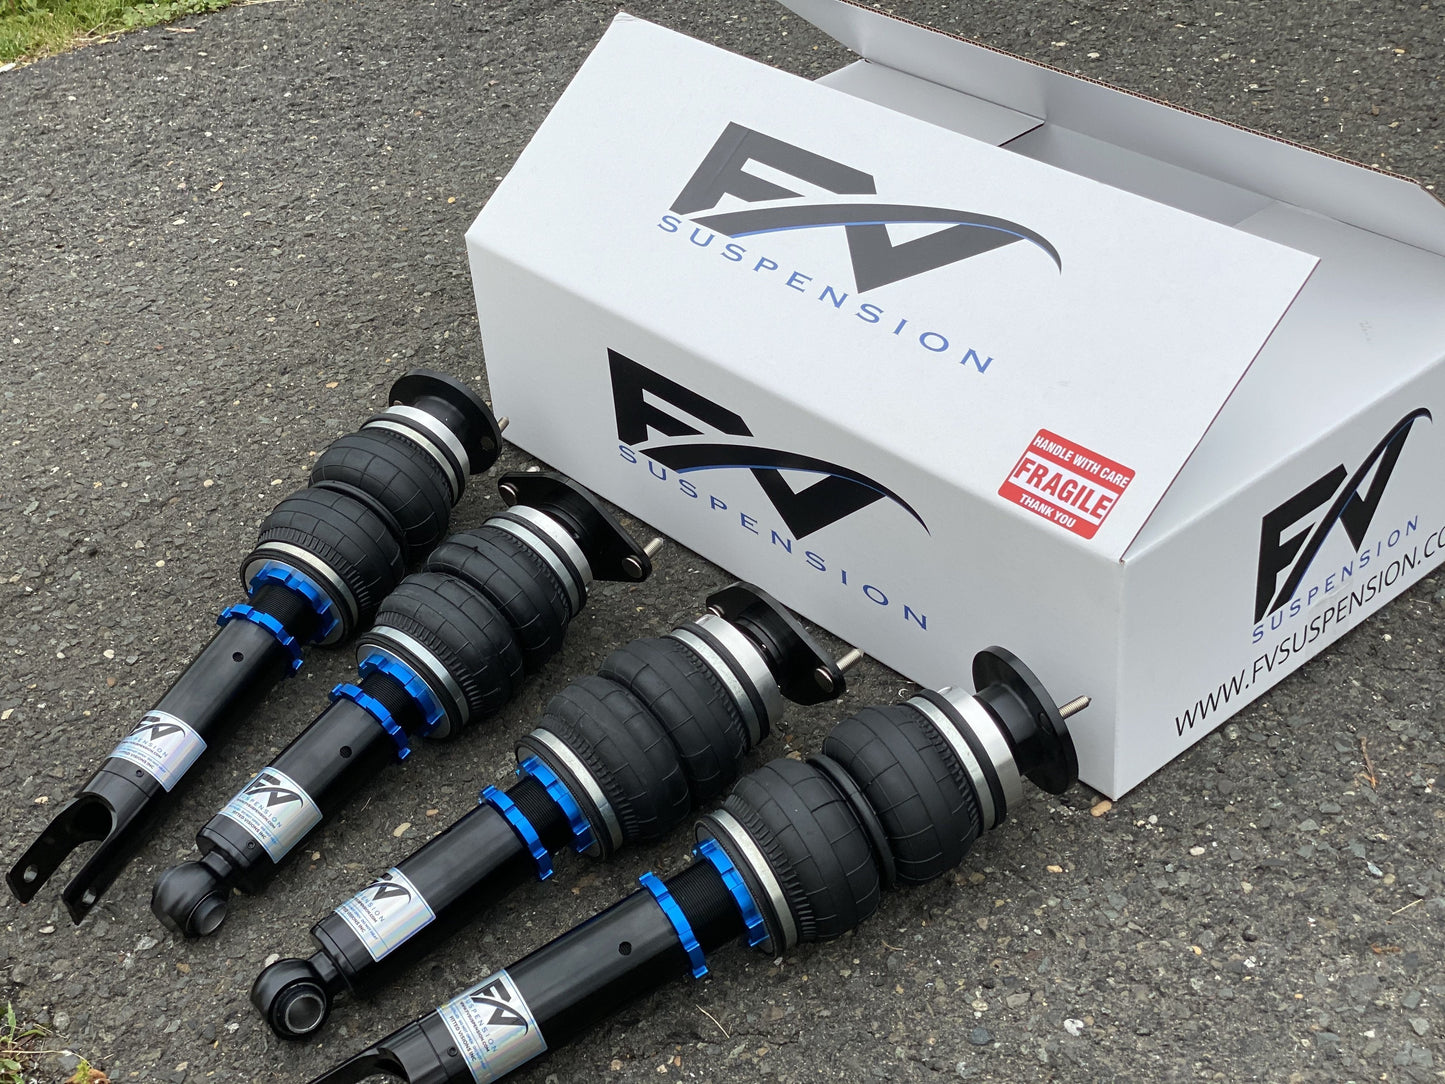 FV Suspension Tier 1 Budget kit Complete Air Ride kit for 82-91 BMW 3 Series E30 - Full Kits